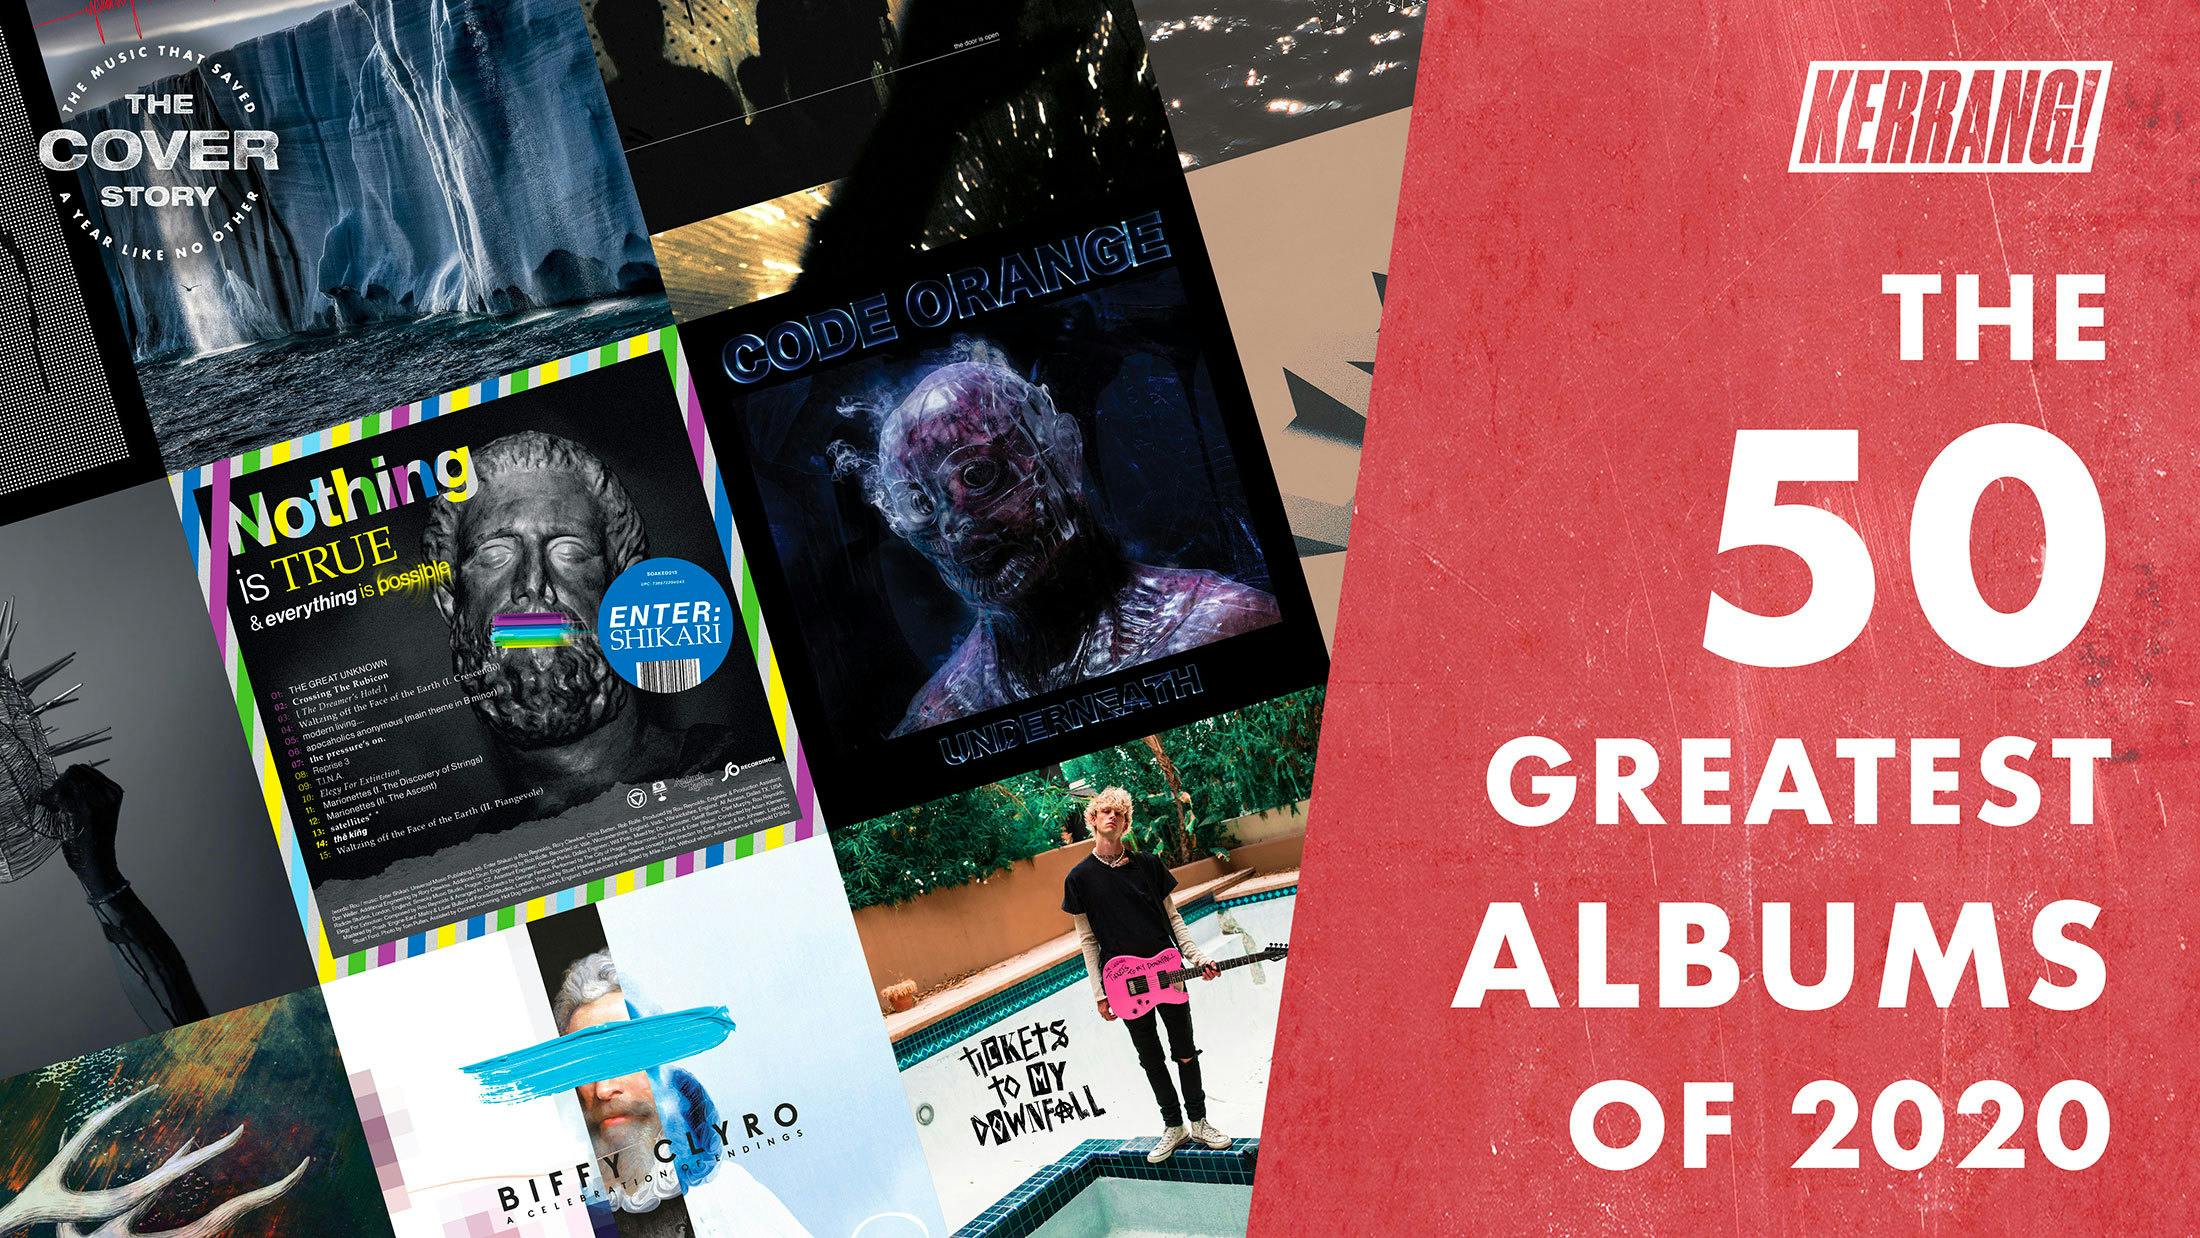 The 50 greatest albums of 2020